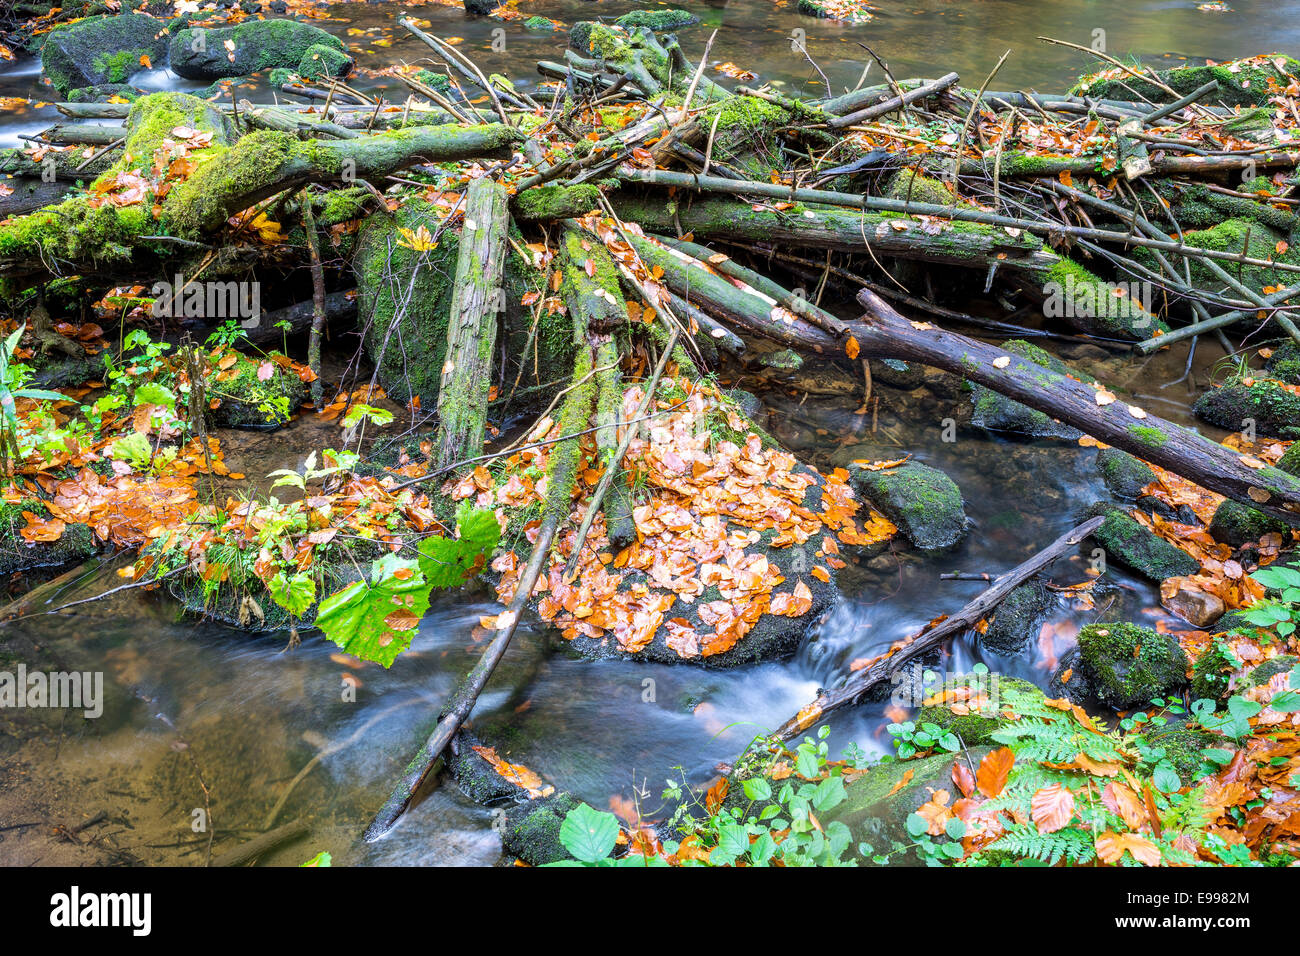 Mossy wooden debris in the river bed Stock Photo